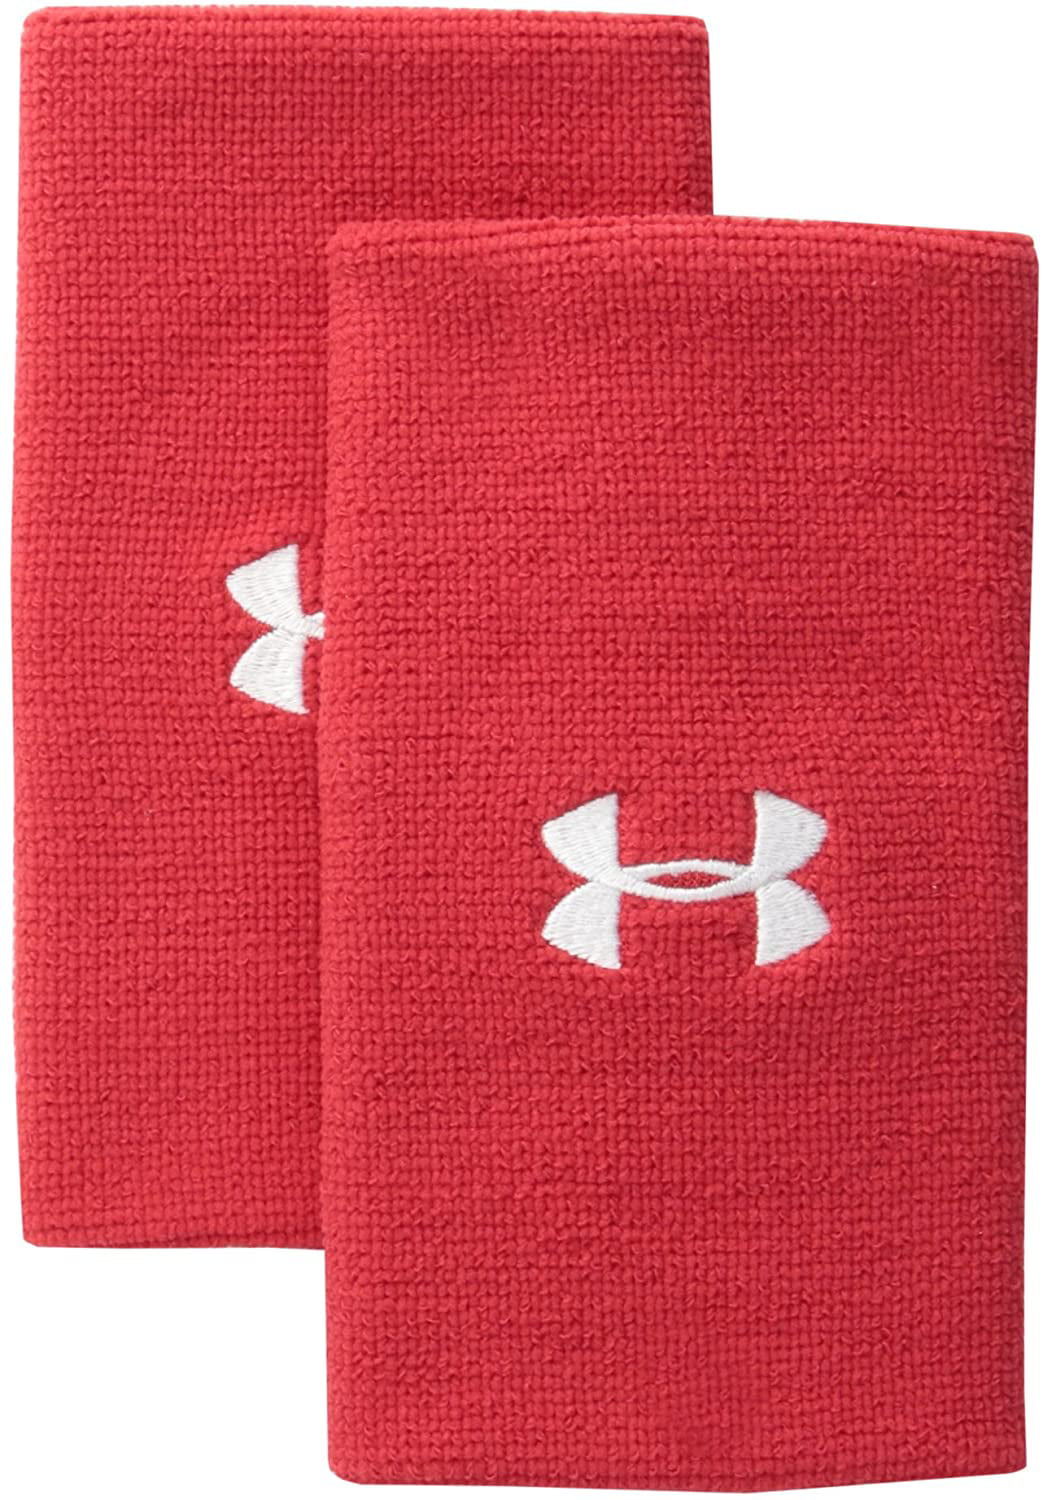 Details about   Under Armour 6" UA Performance Wristband 2-Pack Midnight Navy/White One Size 